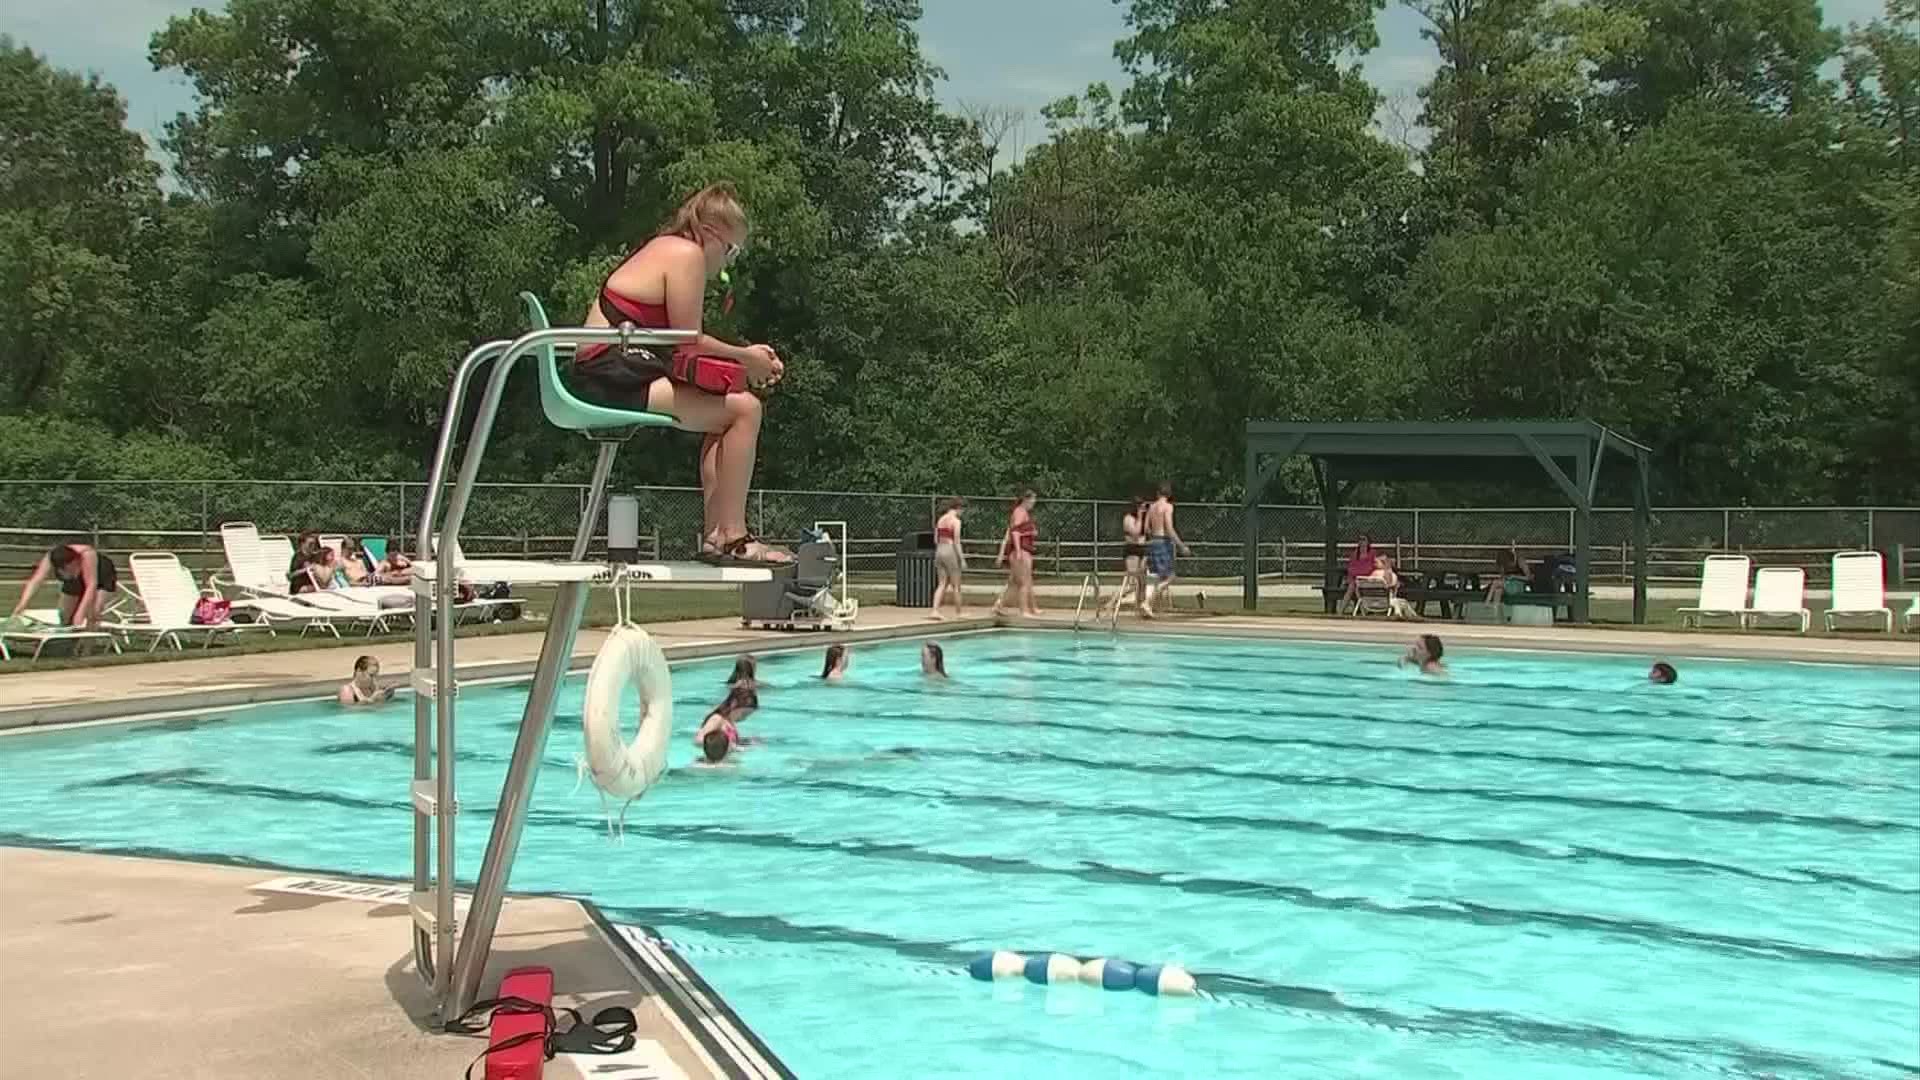 While Columbus is having guests pre-register, Upper Arlington and Gahanna are cutting operating hours due to issues with having enough lifeguards on duty.